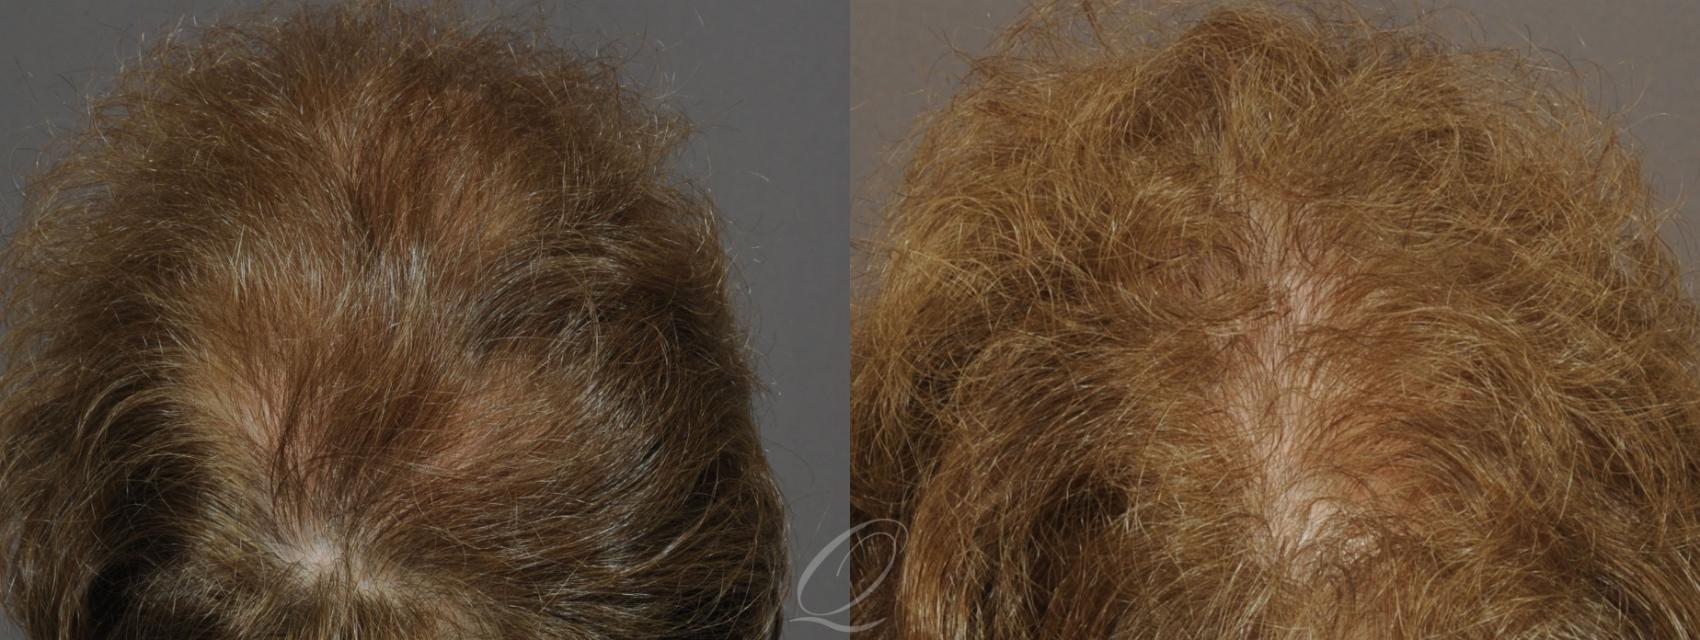 FUT Case 1047 Before & After View #3 | Rochester, Buffalo, & Syracuse, NY | Quatela Center for Hair Restoration